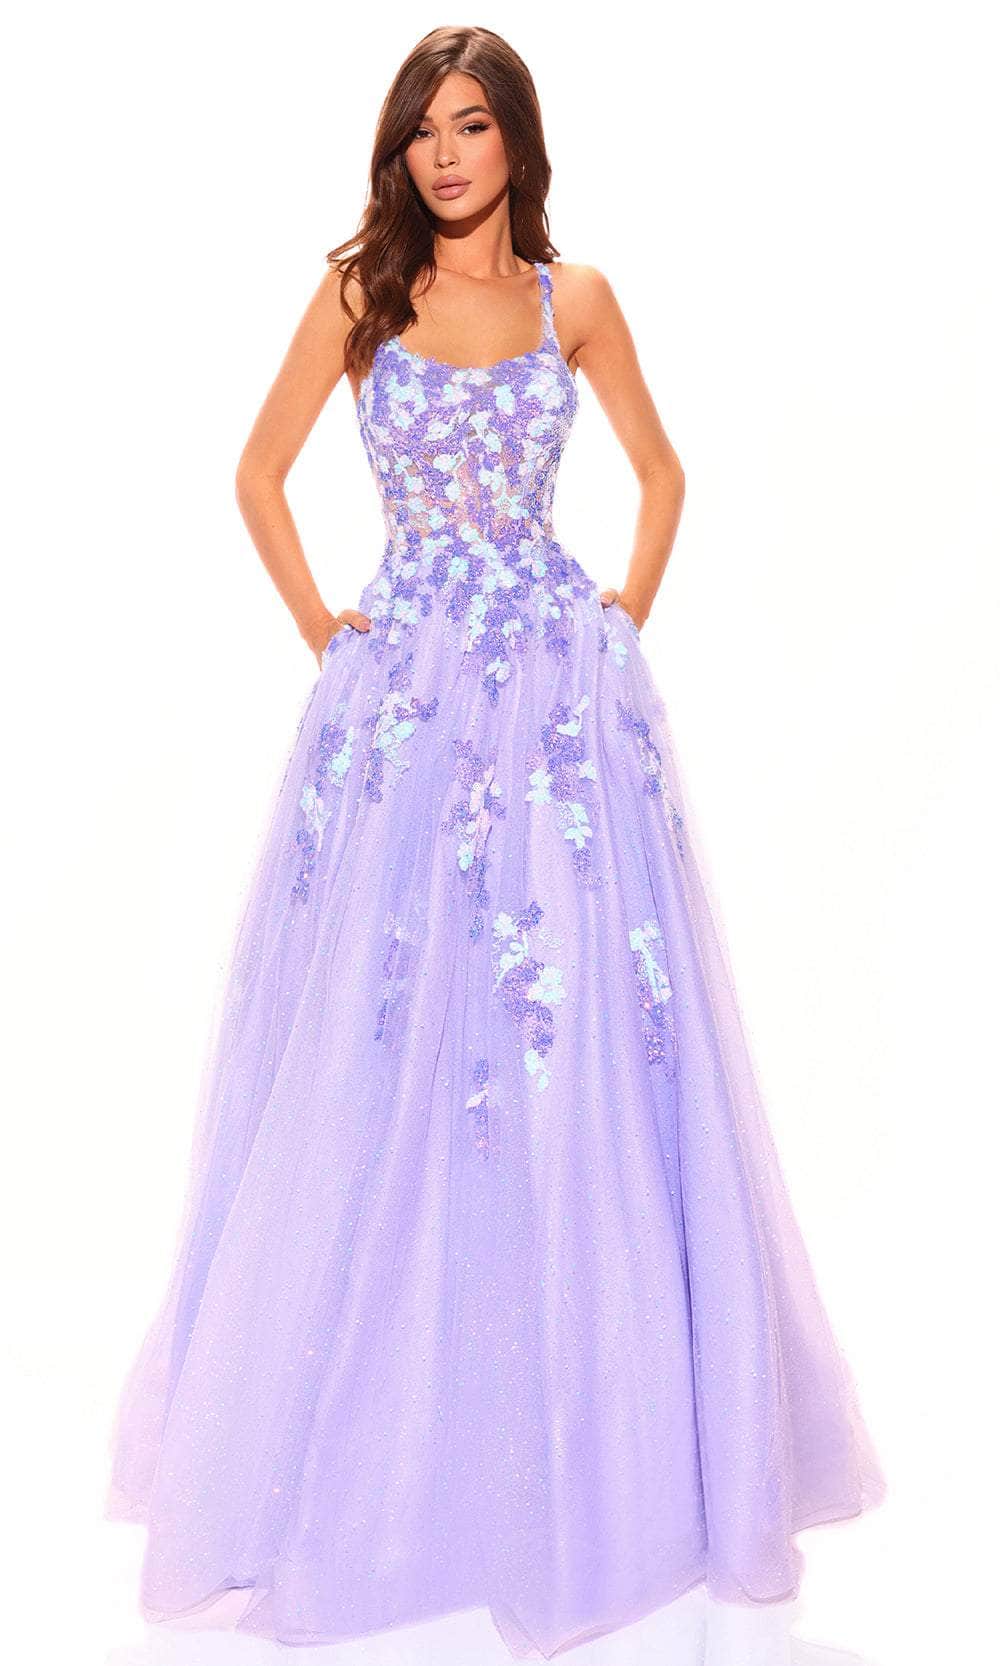 Amarra 88767 - Sequined Floral Prom Dress 2 / Periwinkle